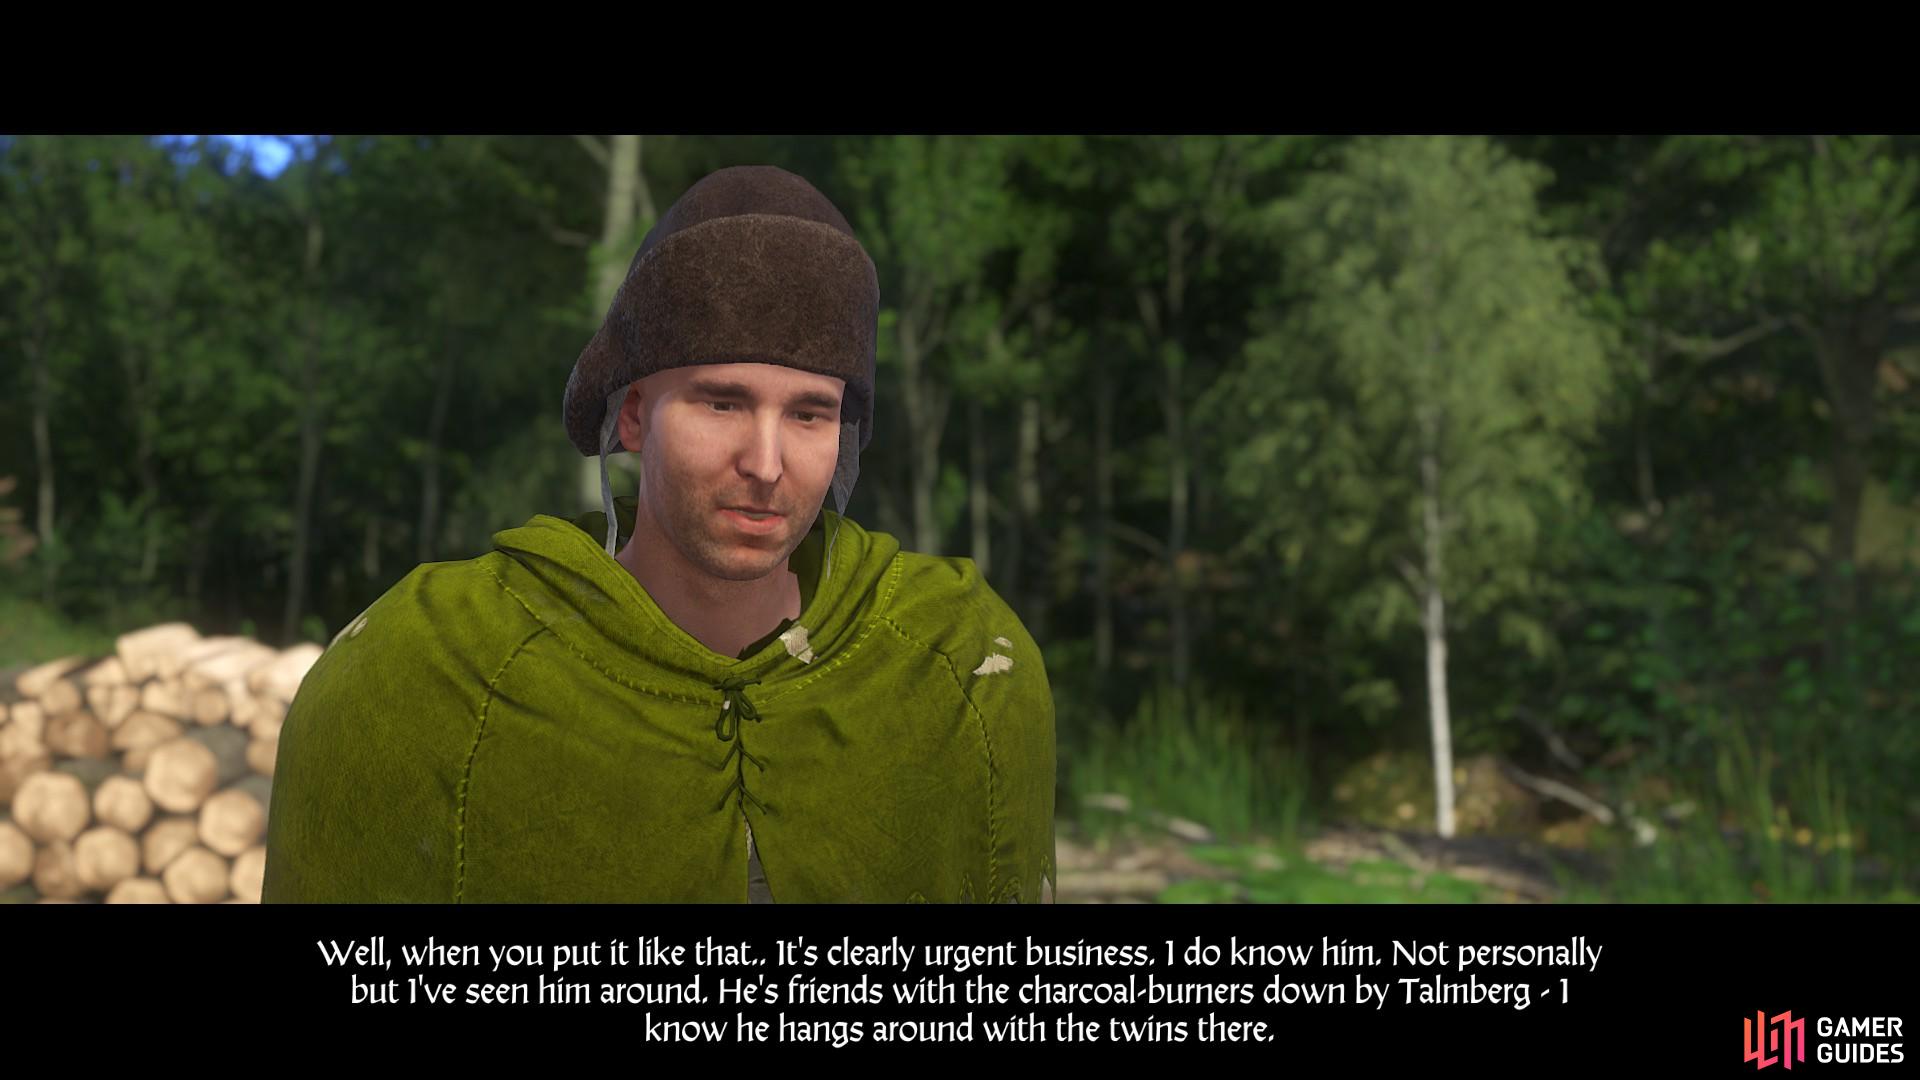 Speak with the charcoal-burner in the camp north of Neuhof and convince him to tell you more.